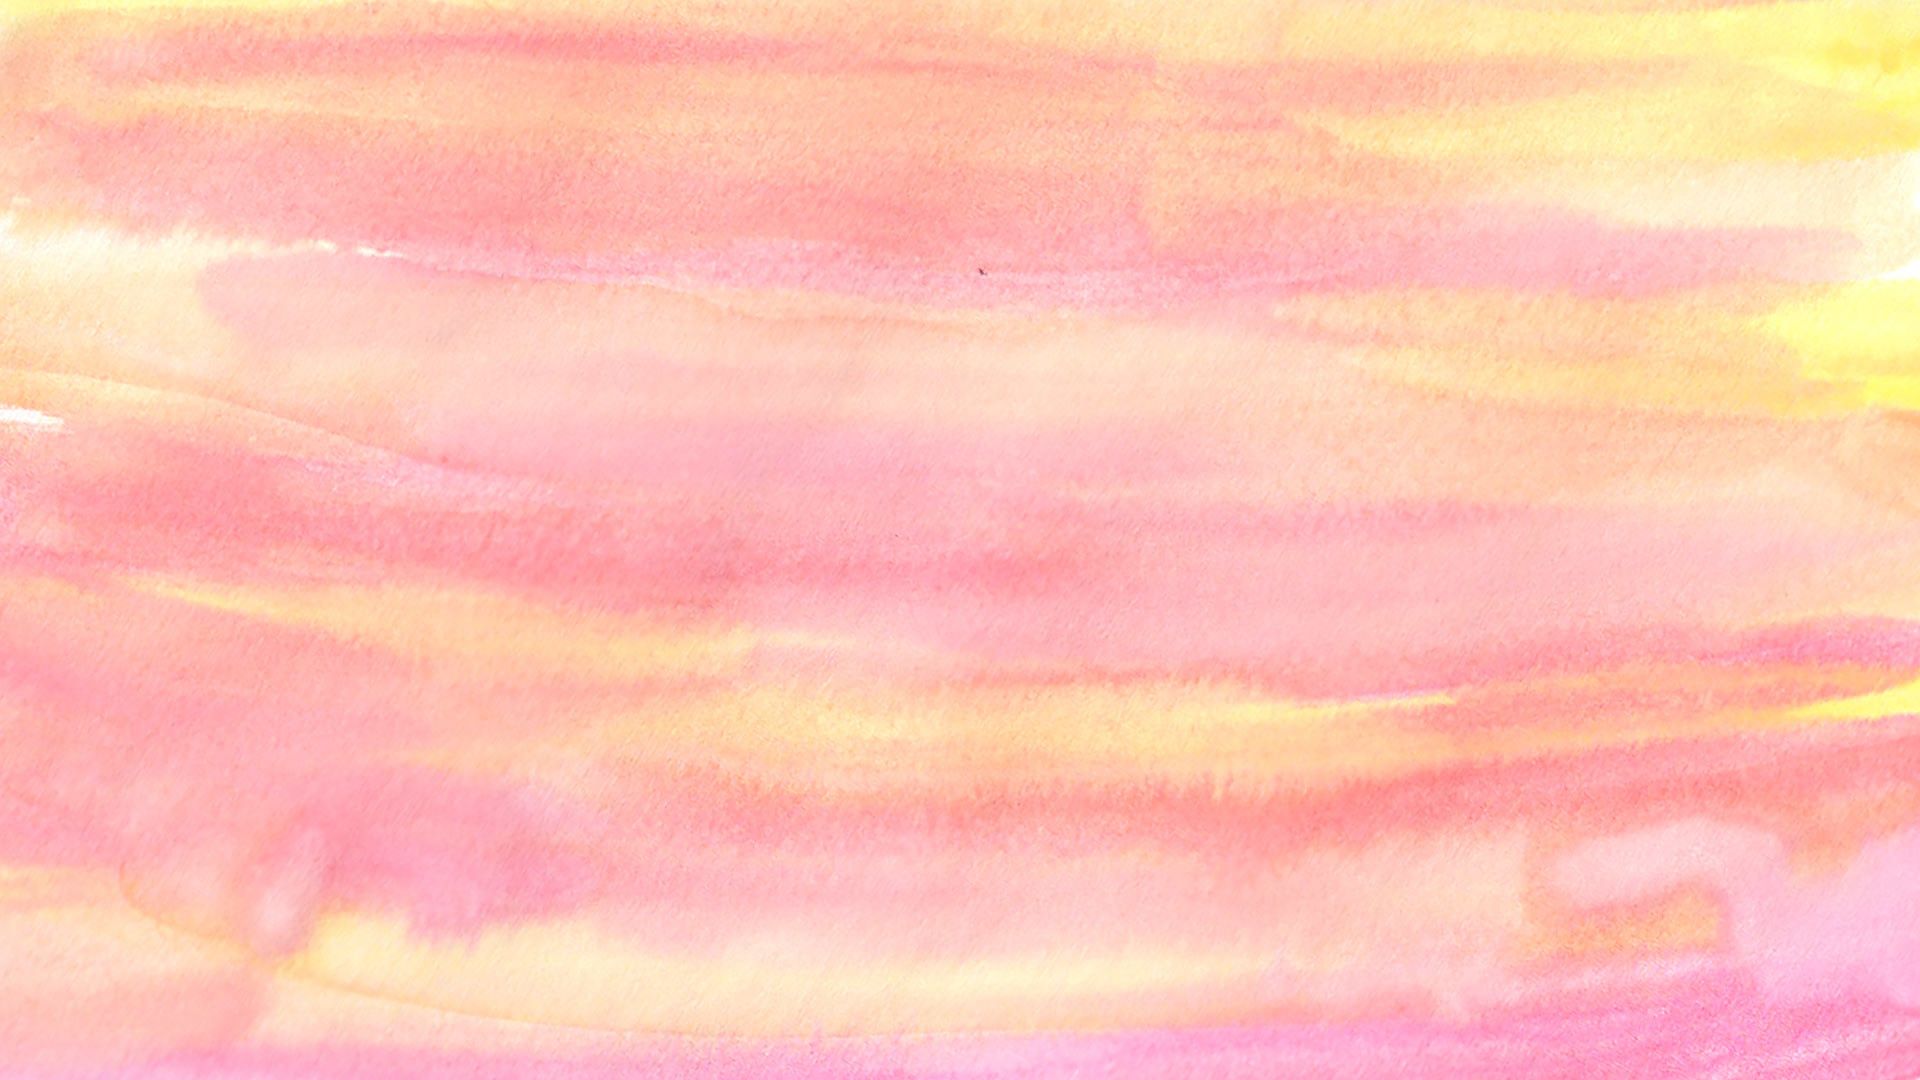 Pink Watercolor Wallpaper Free Pink Watercolor Background